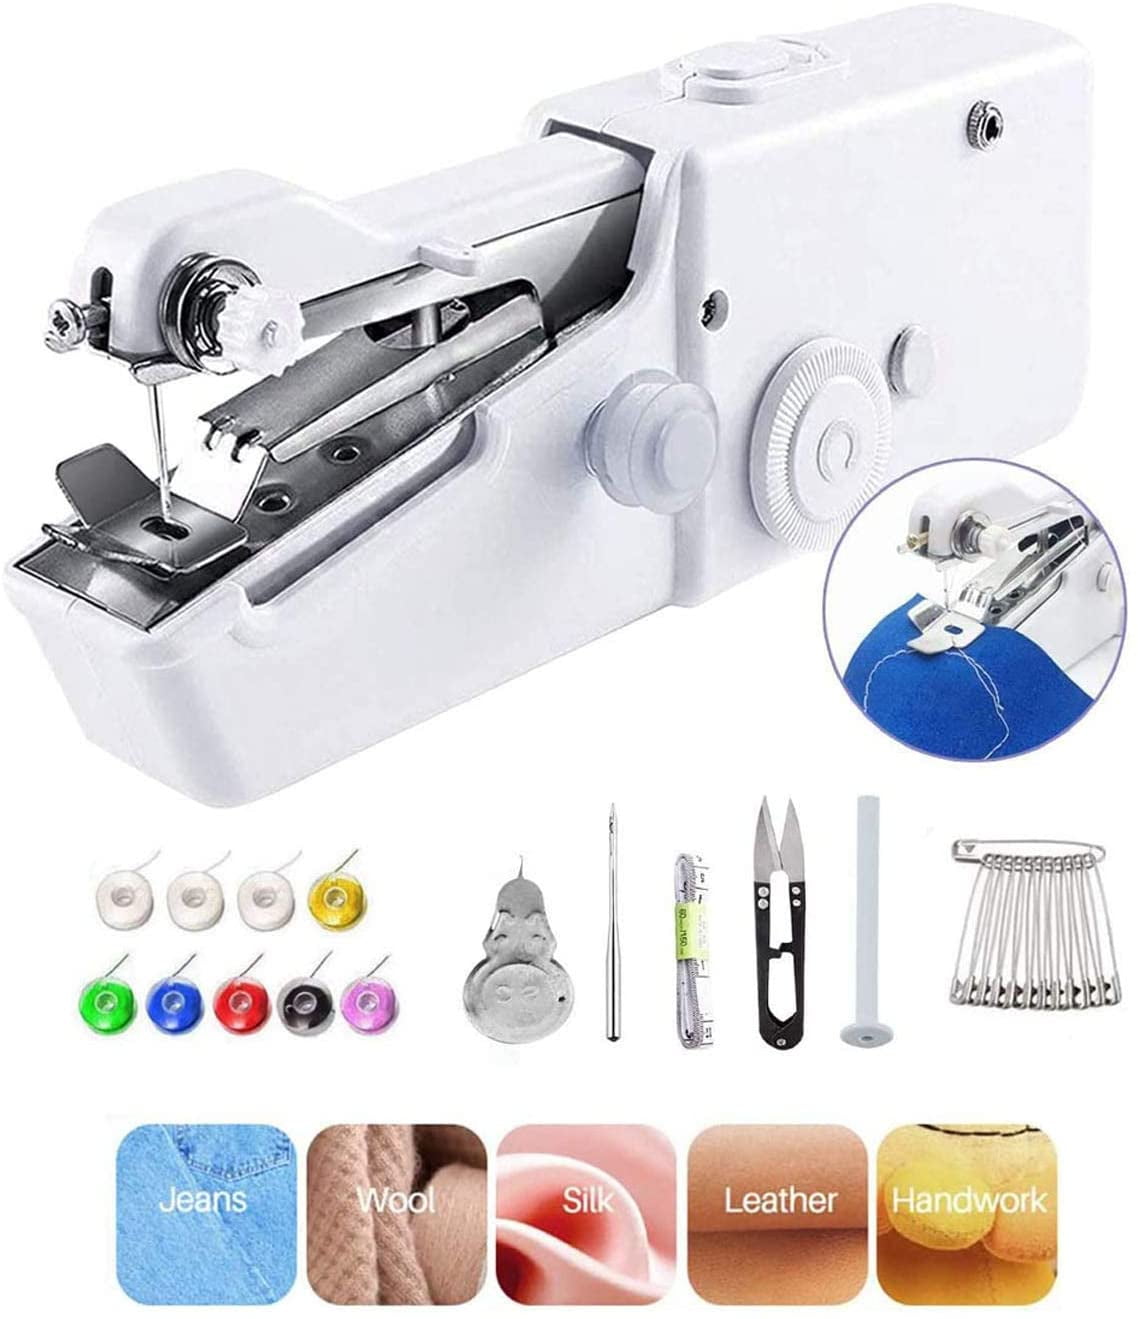 Household Sewing Machine Portable Electrical Mini Handy